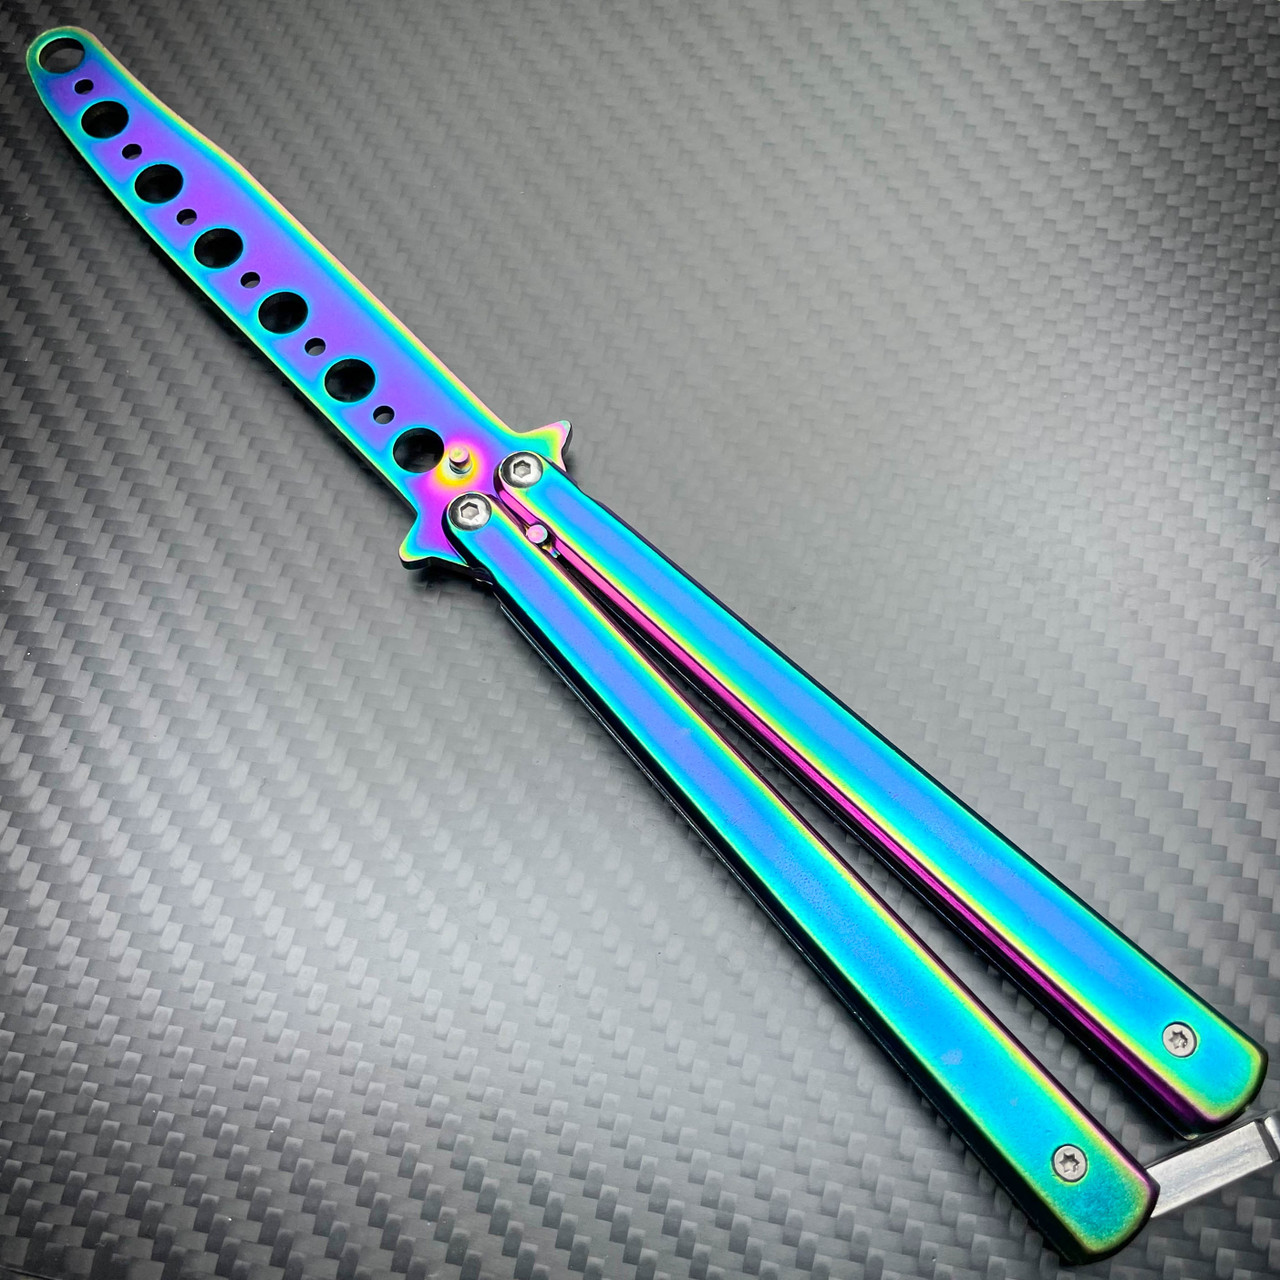 Dull Butterfly Knife Balisong Trainer – Winged Edge Butterfly